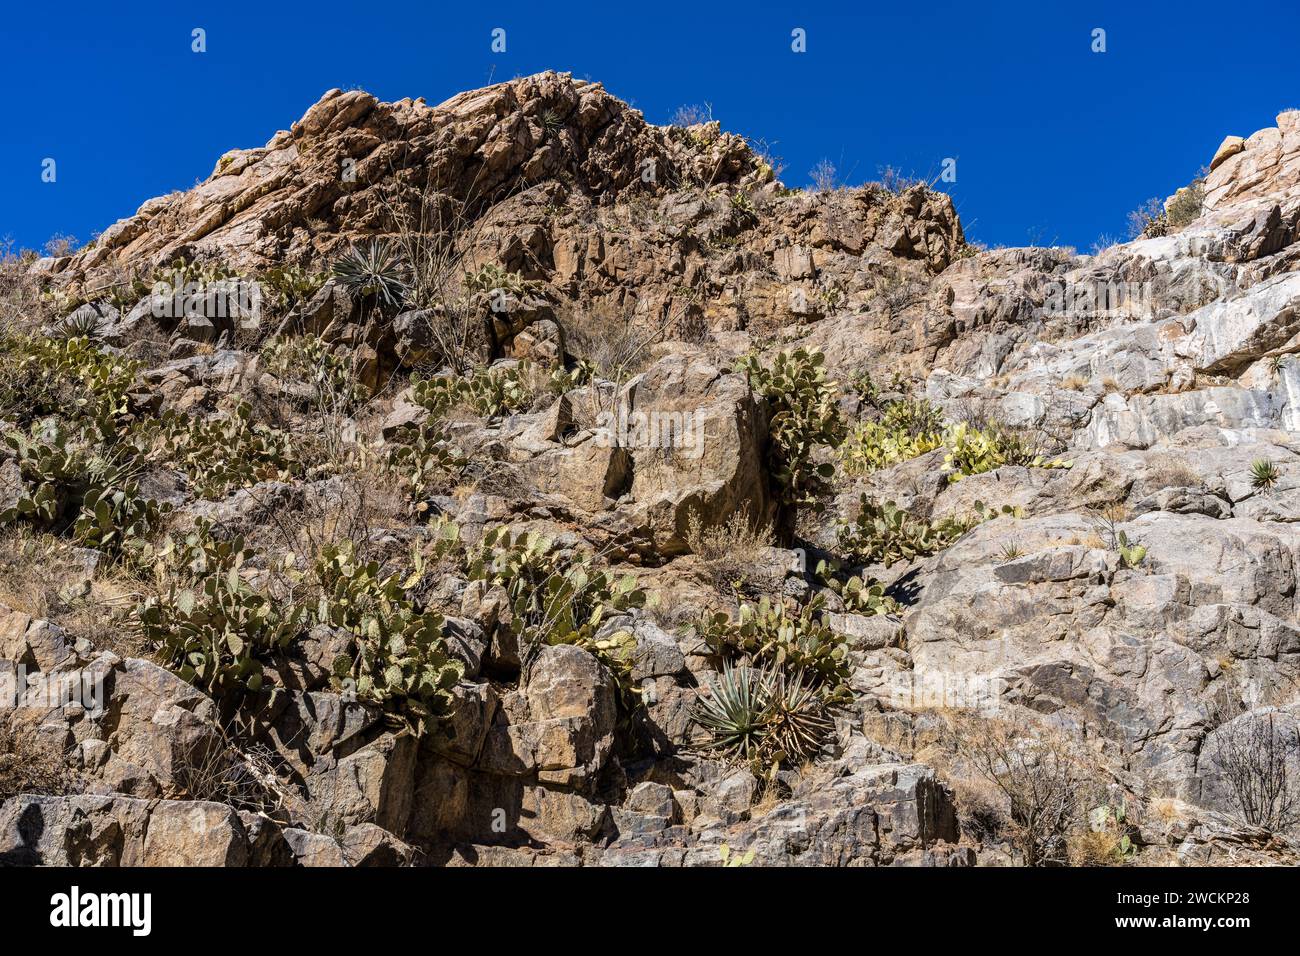 Agaves and prickly pear cacti growing out of a rock face in Box Canyon in the Sonoran Desert south of Tucson, Arizona. Stock Photo